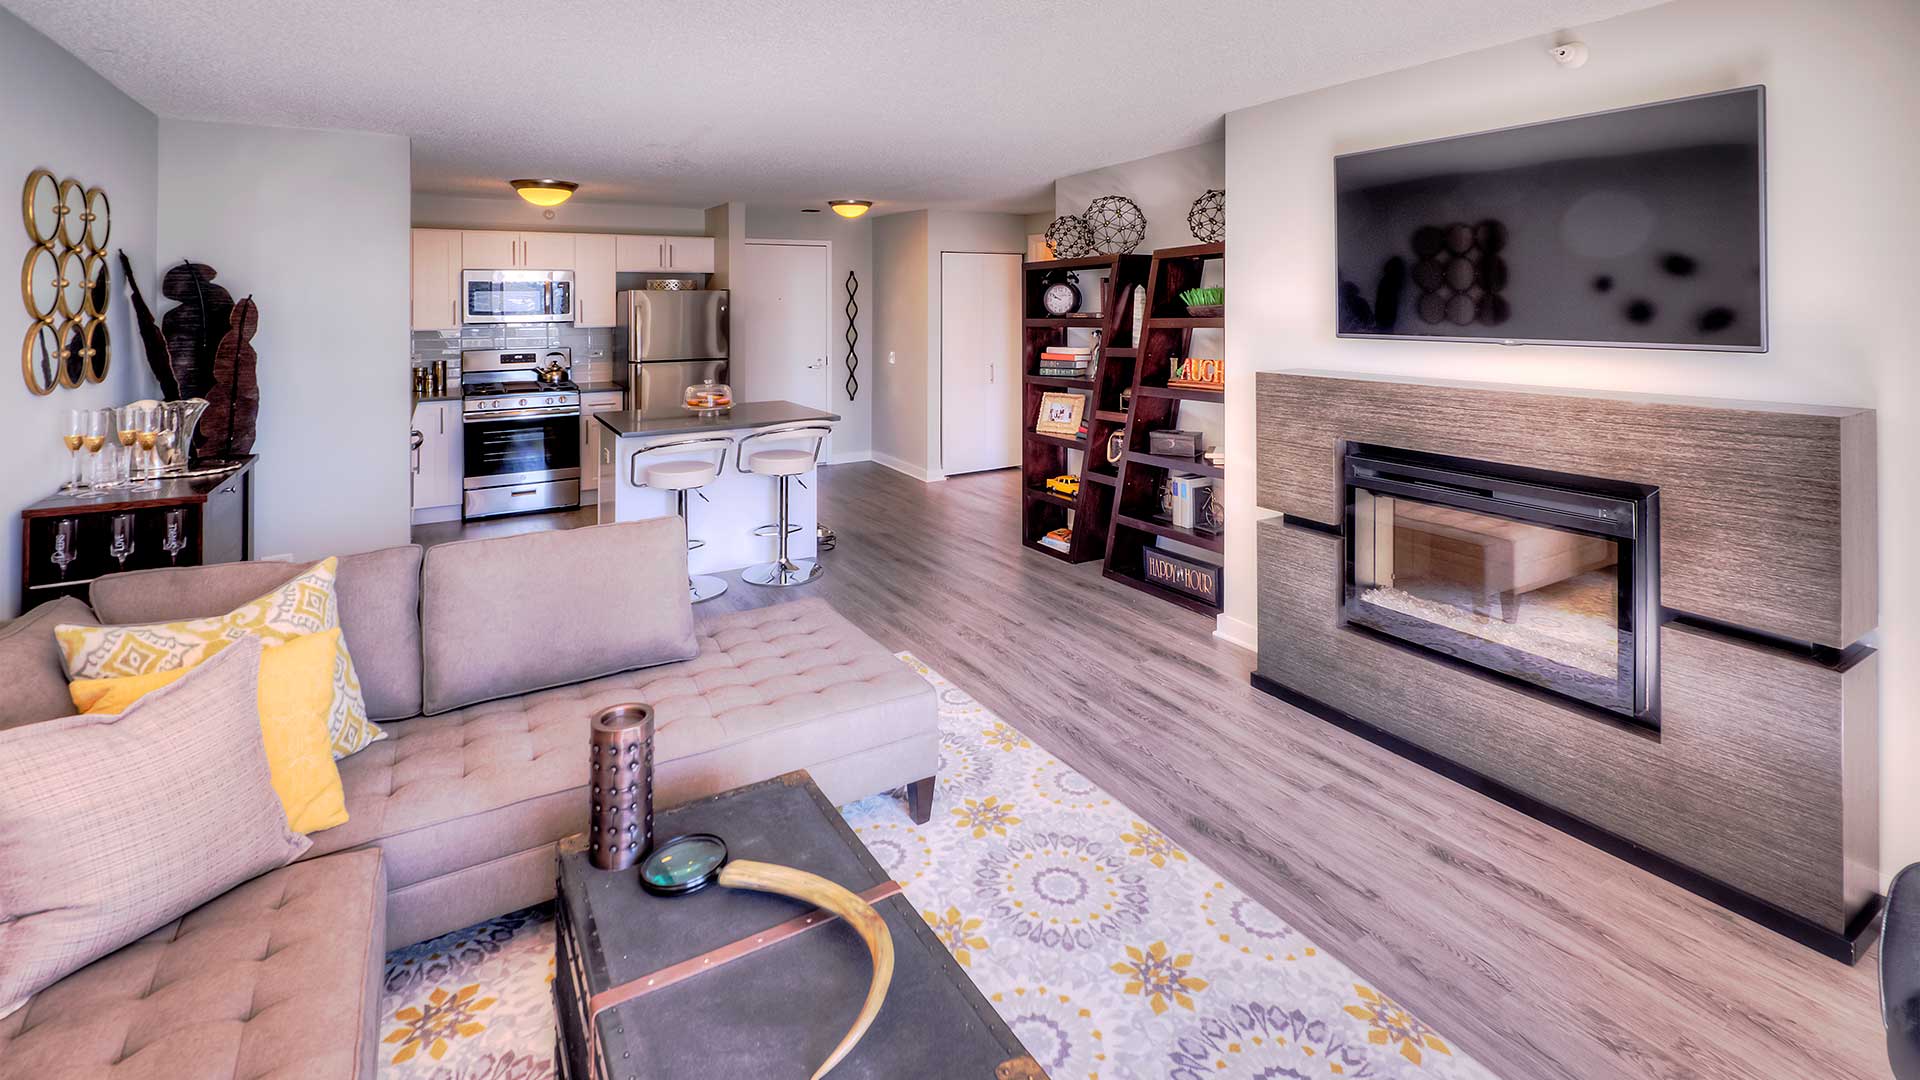 Looking across the living and kitchen in a residence at Grand Plaza. A couch and coffee table are near on the left with a fireplace and television mounted above across. Further back to the left is the kitchen with a bookshelf across from it on the right.